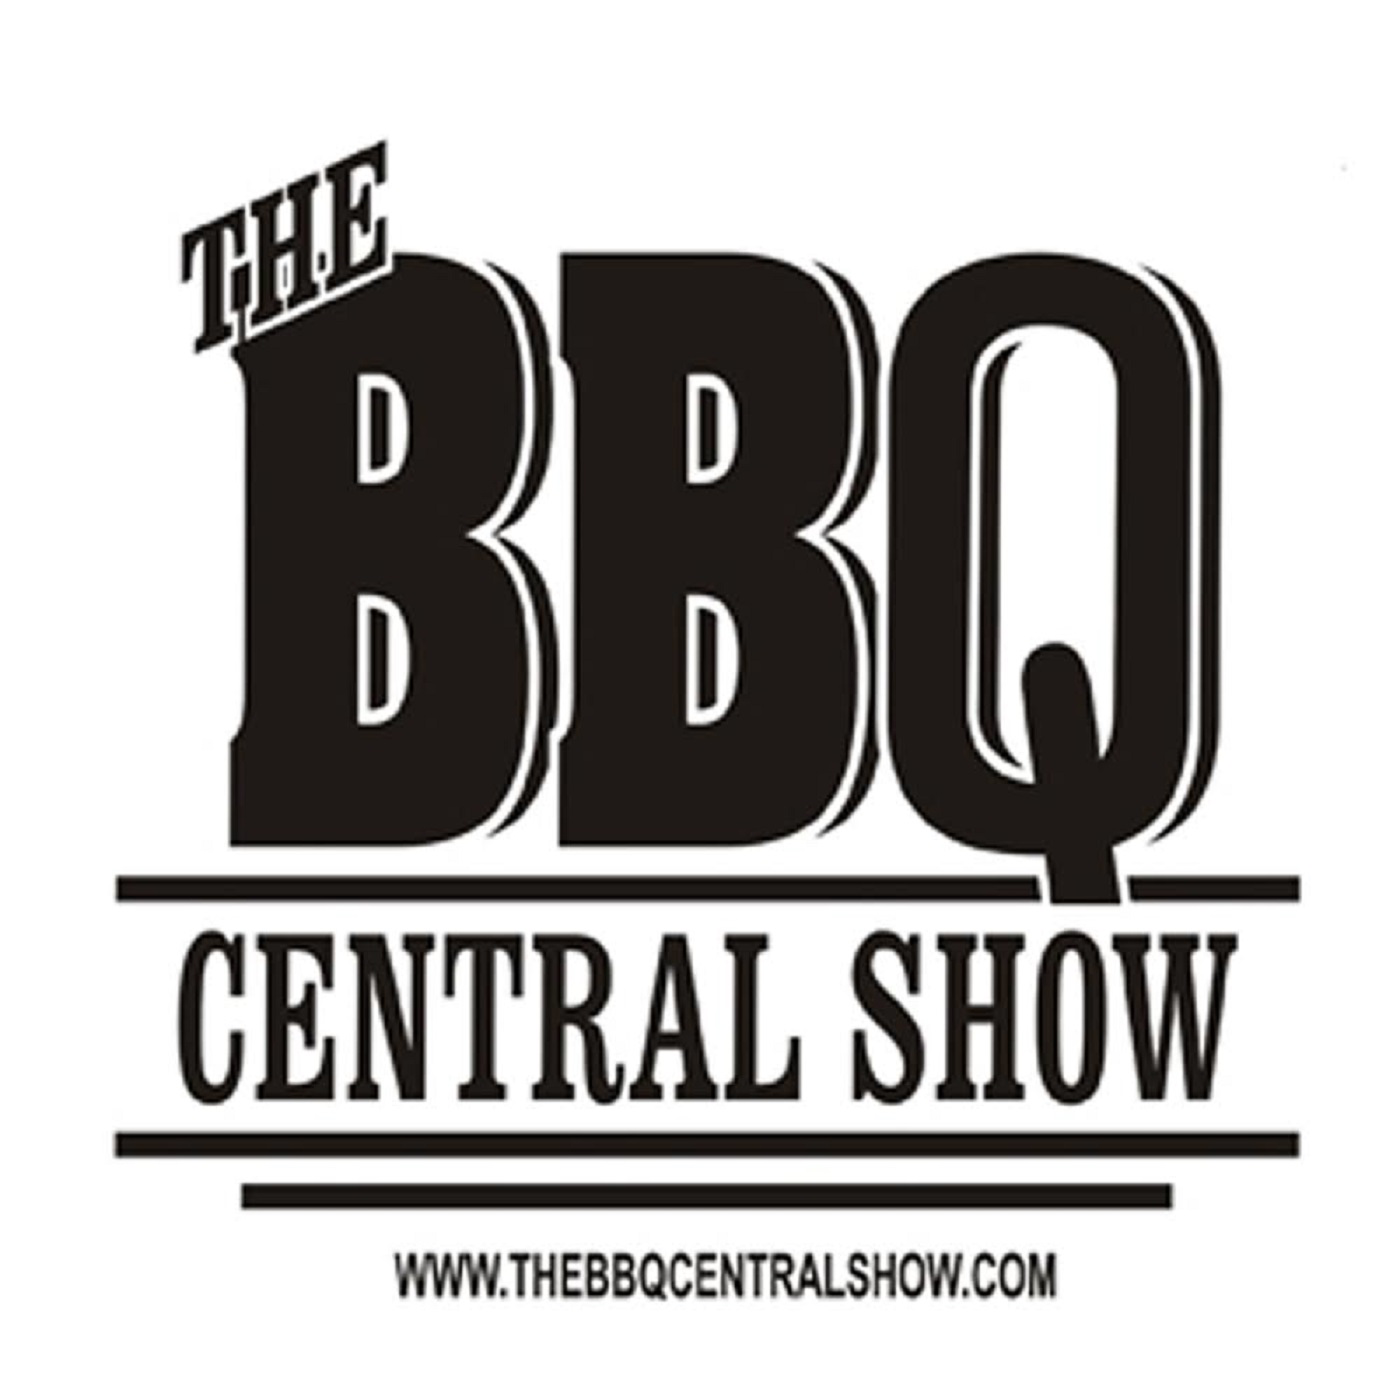 A highlight from The Best Moments of The BBQ Central Show in 10 Minutes or Less